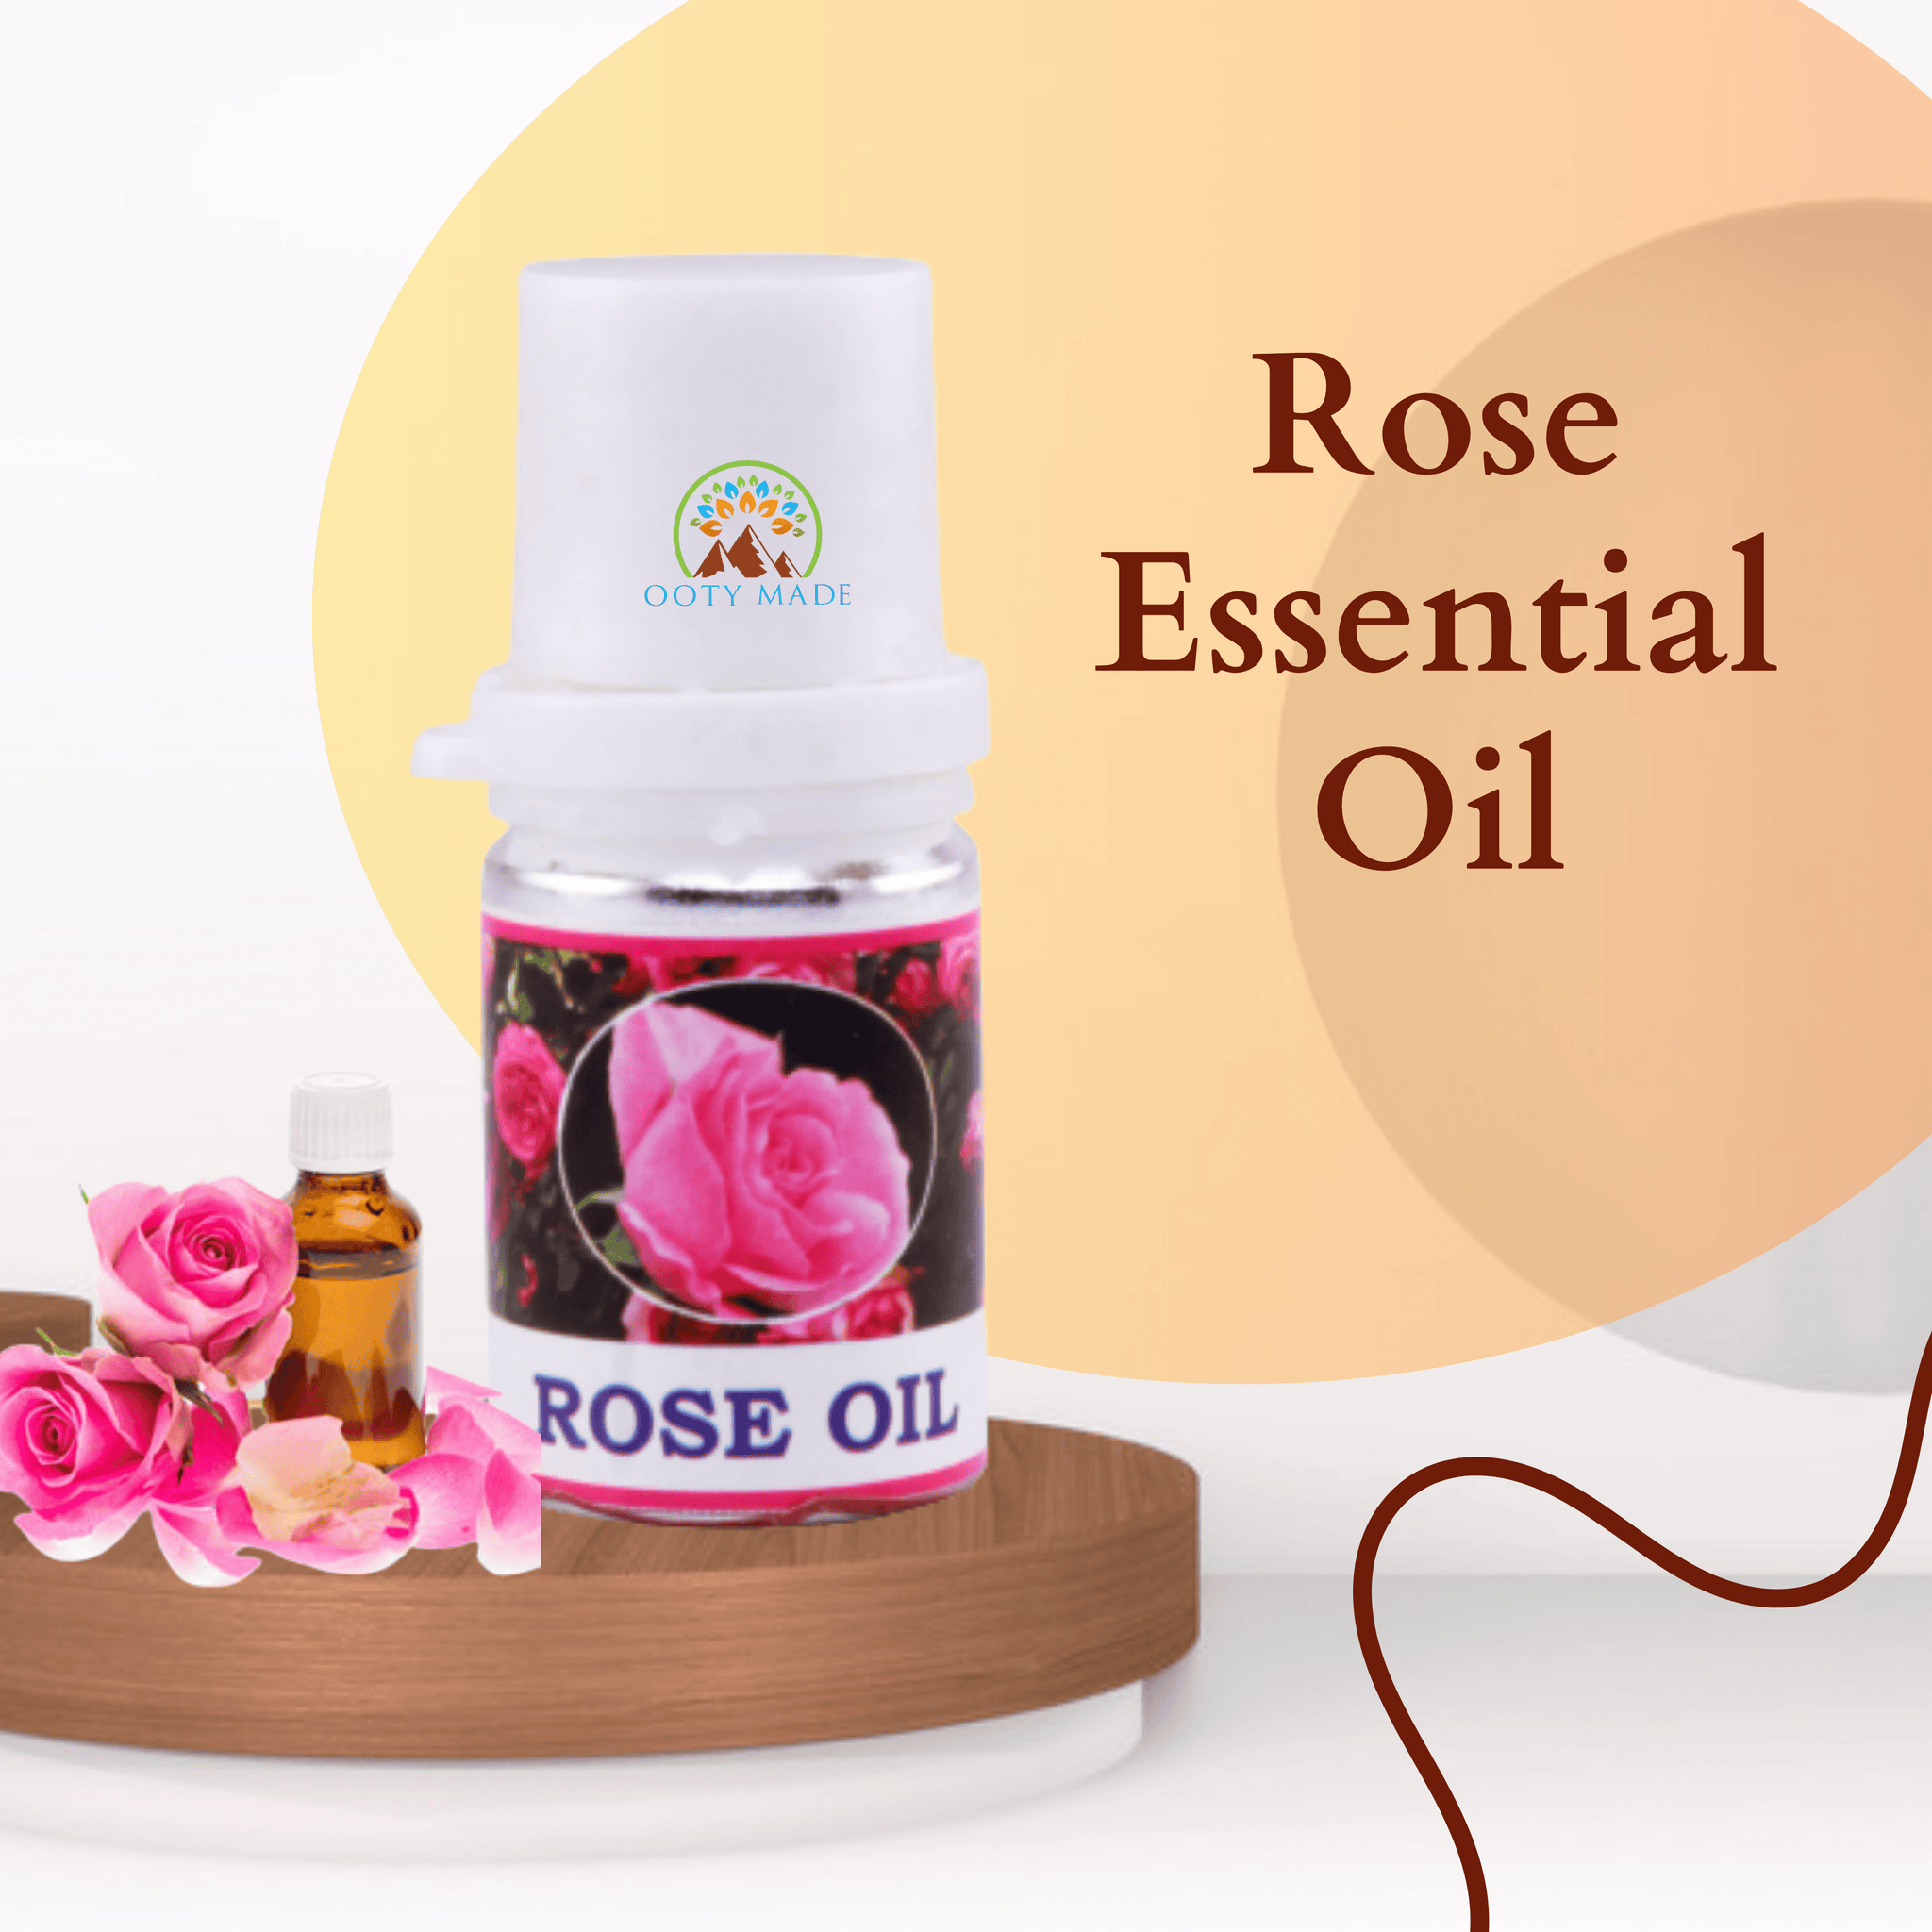 Buy rose essential oil for skin, hair, and aroma diffusers